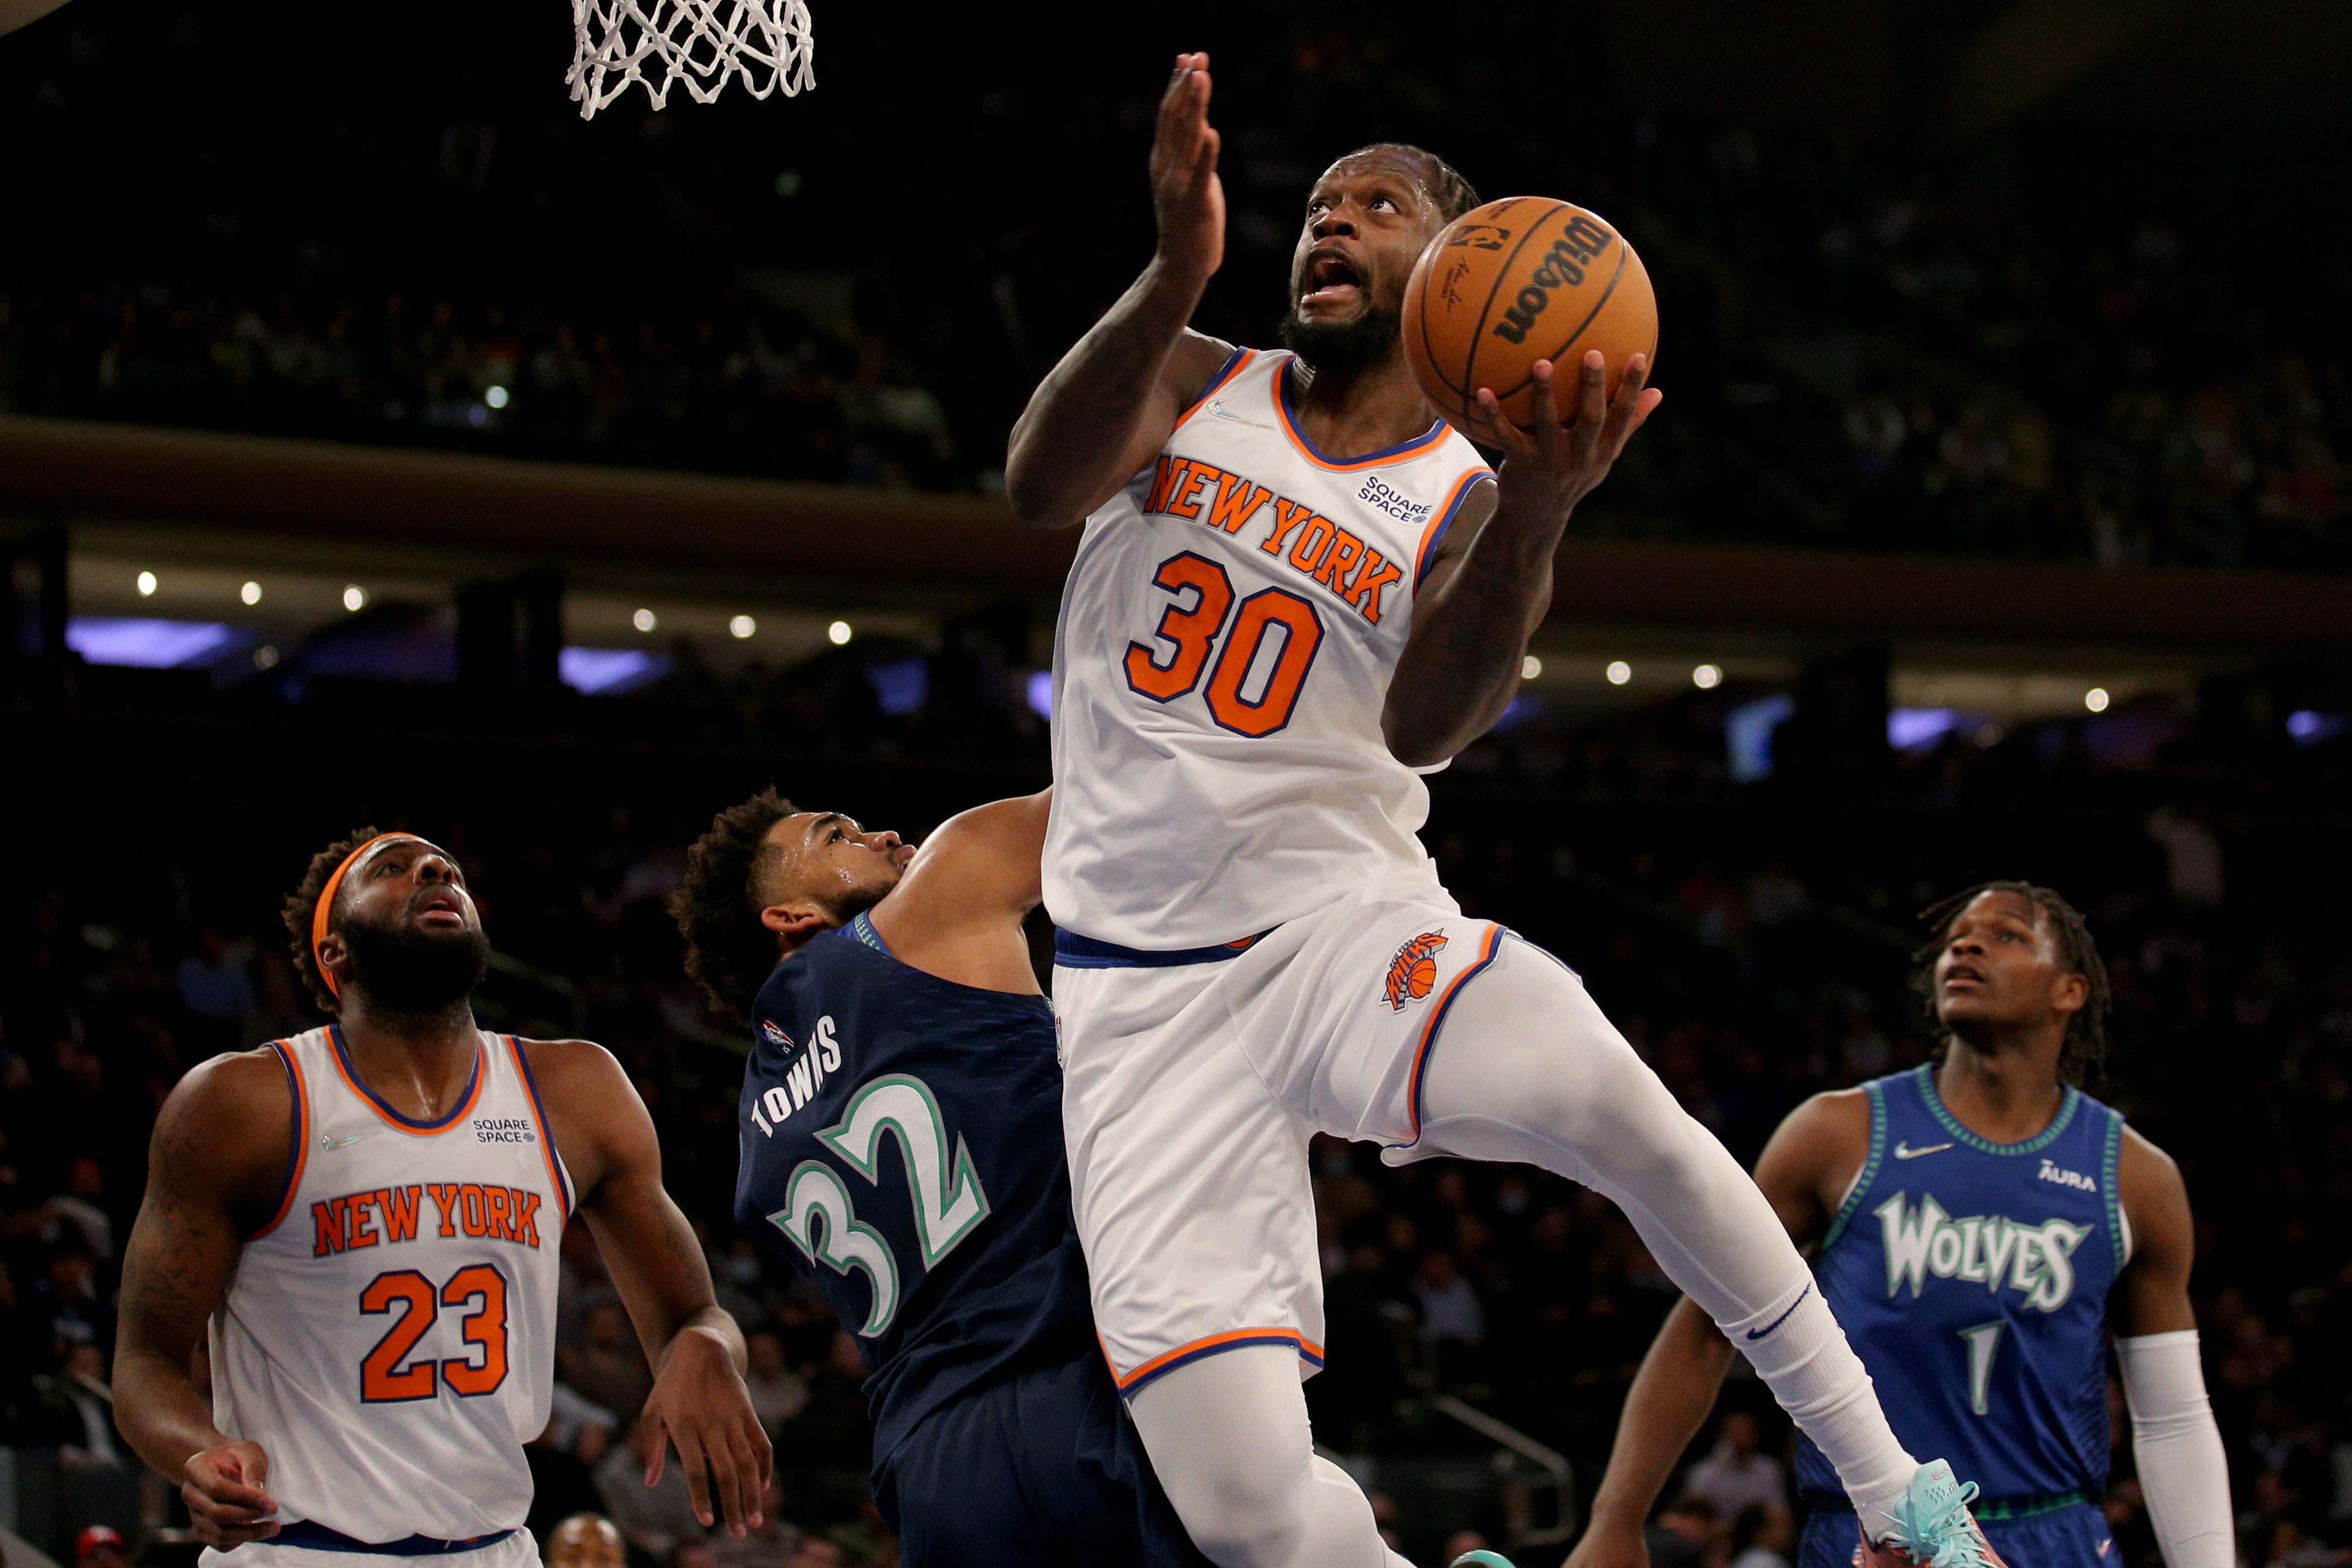 Possible scenarios for the Knicks at the NBA trade deadline